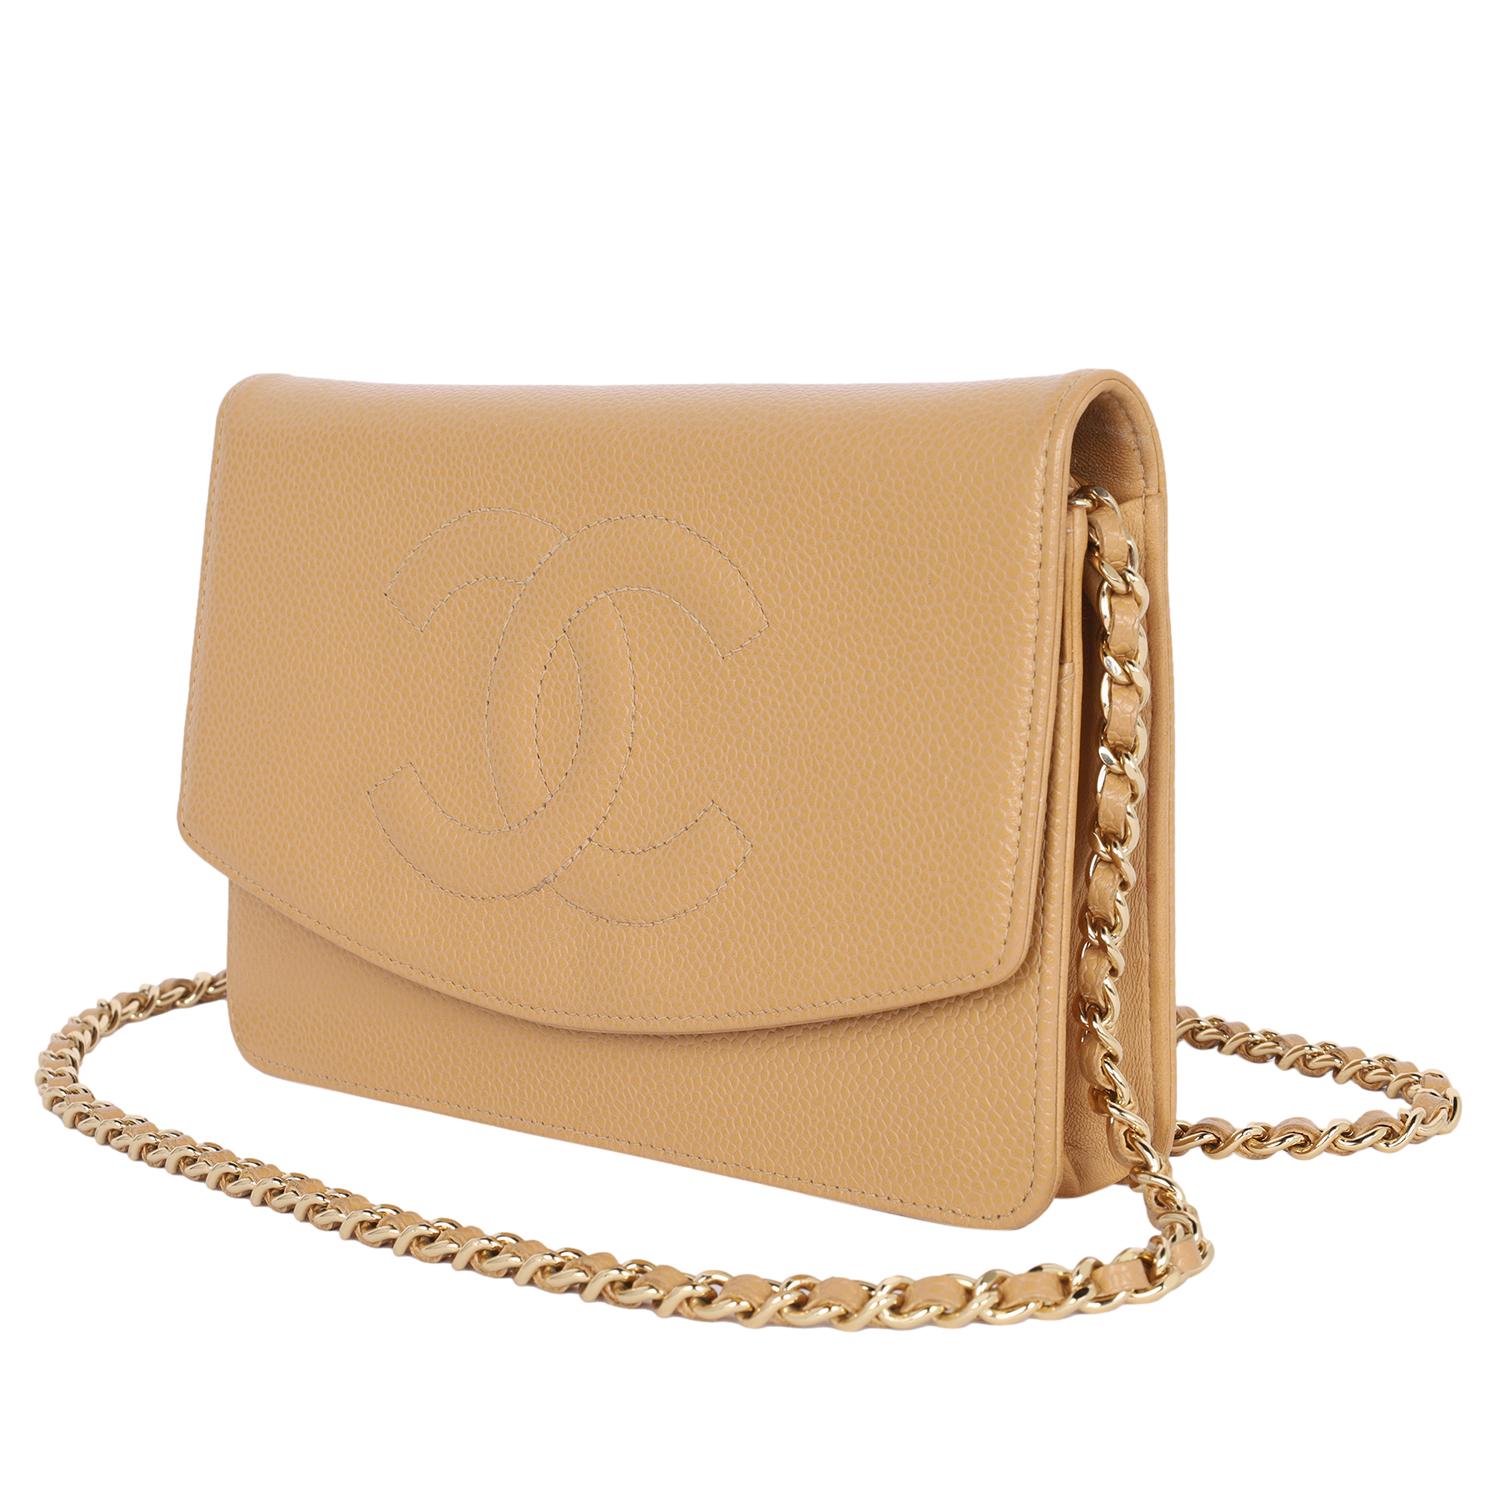 Authentic, pre-owned Chanel tan caviar leather wallet on a chain. This bag is gorgeous!

Extremely popular due to its versatility, the Wallet on a Chain (or WOC) is always in high demand. Tannish brown caviar leather is textured and durable. Large